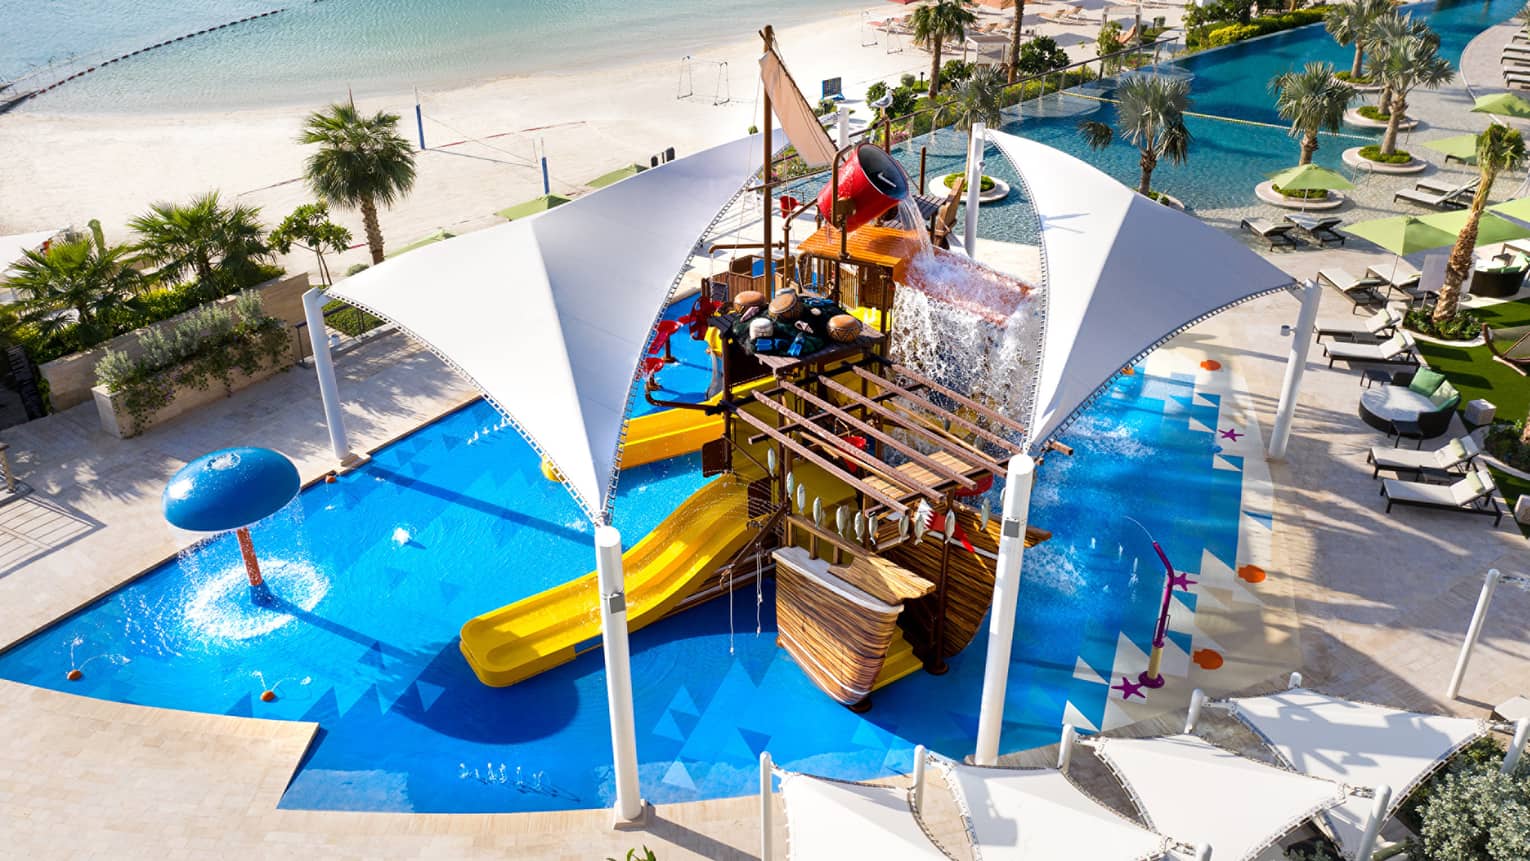 A large orange waterslide built into a faux pirate ship descending into a crystal blue pool of water.